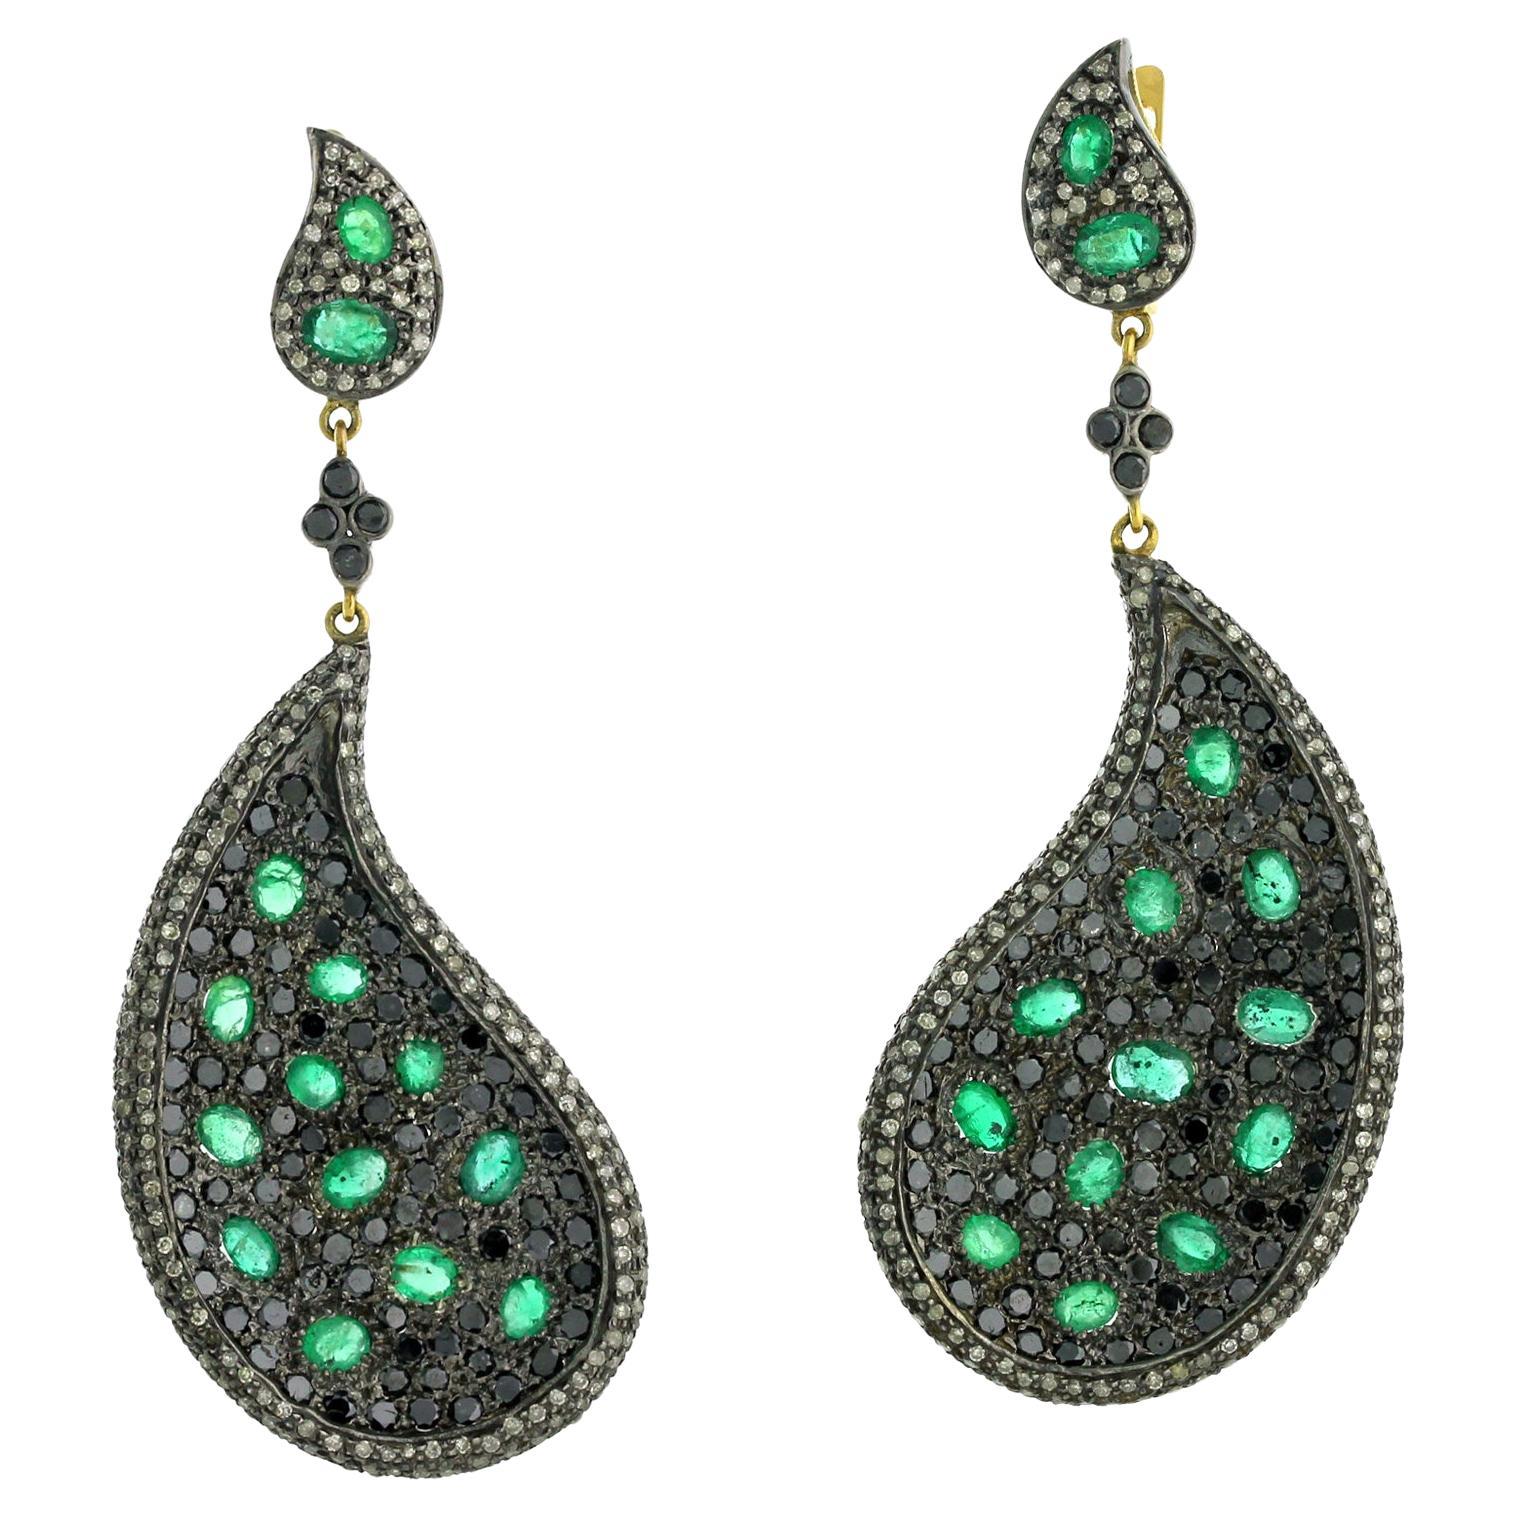 Feather Shaped Earrings With Emerald & Pave Diamonds Made in 14k Gold & Silver